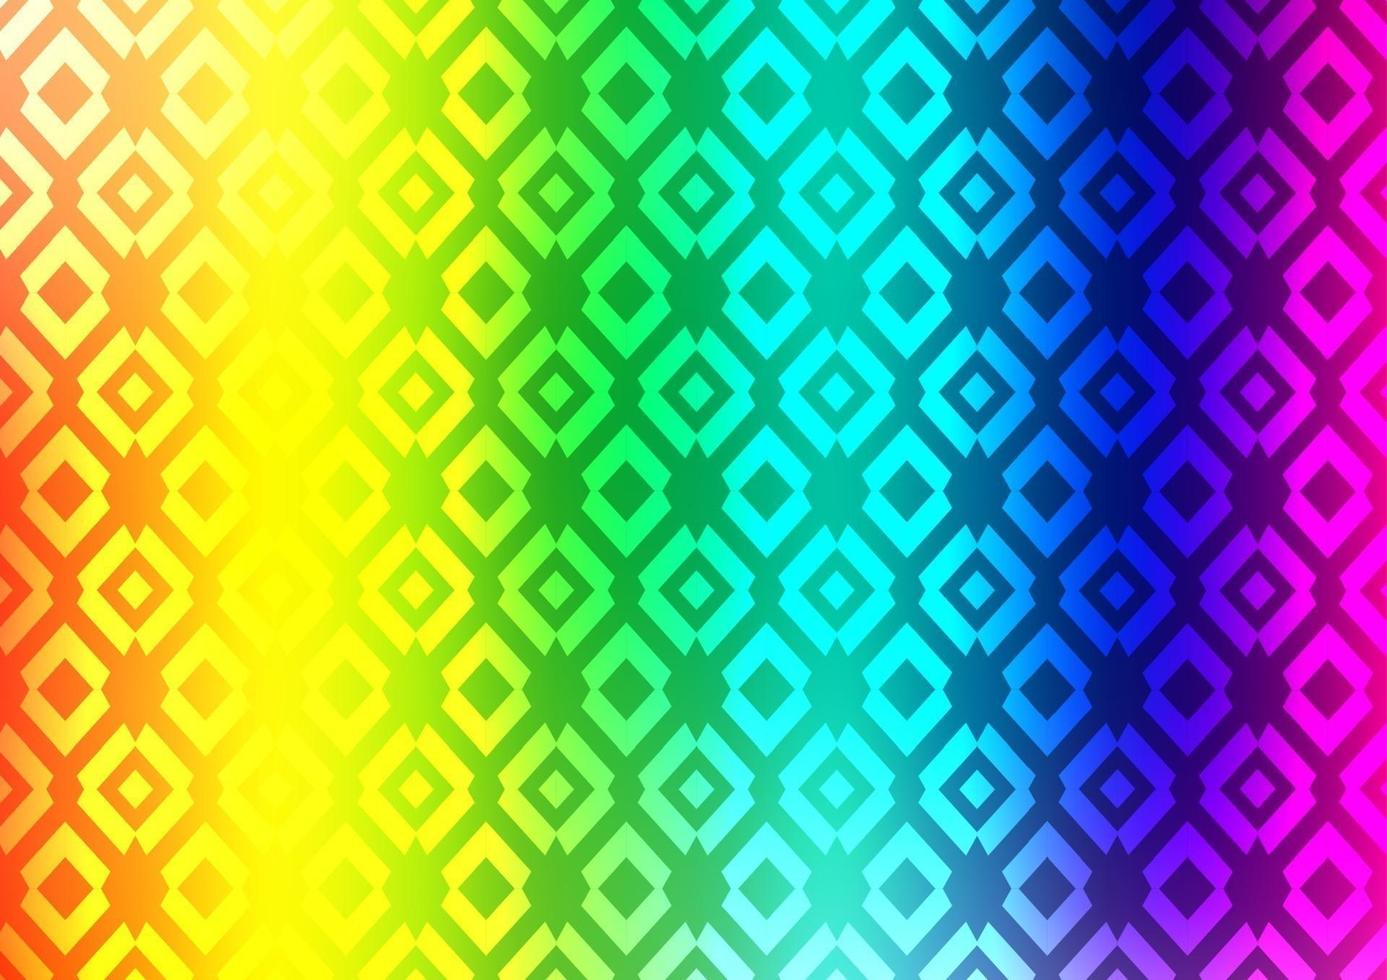 Light Multicolor, Rainbow vector template with crystals, rectangles.